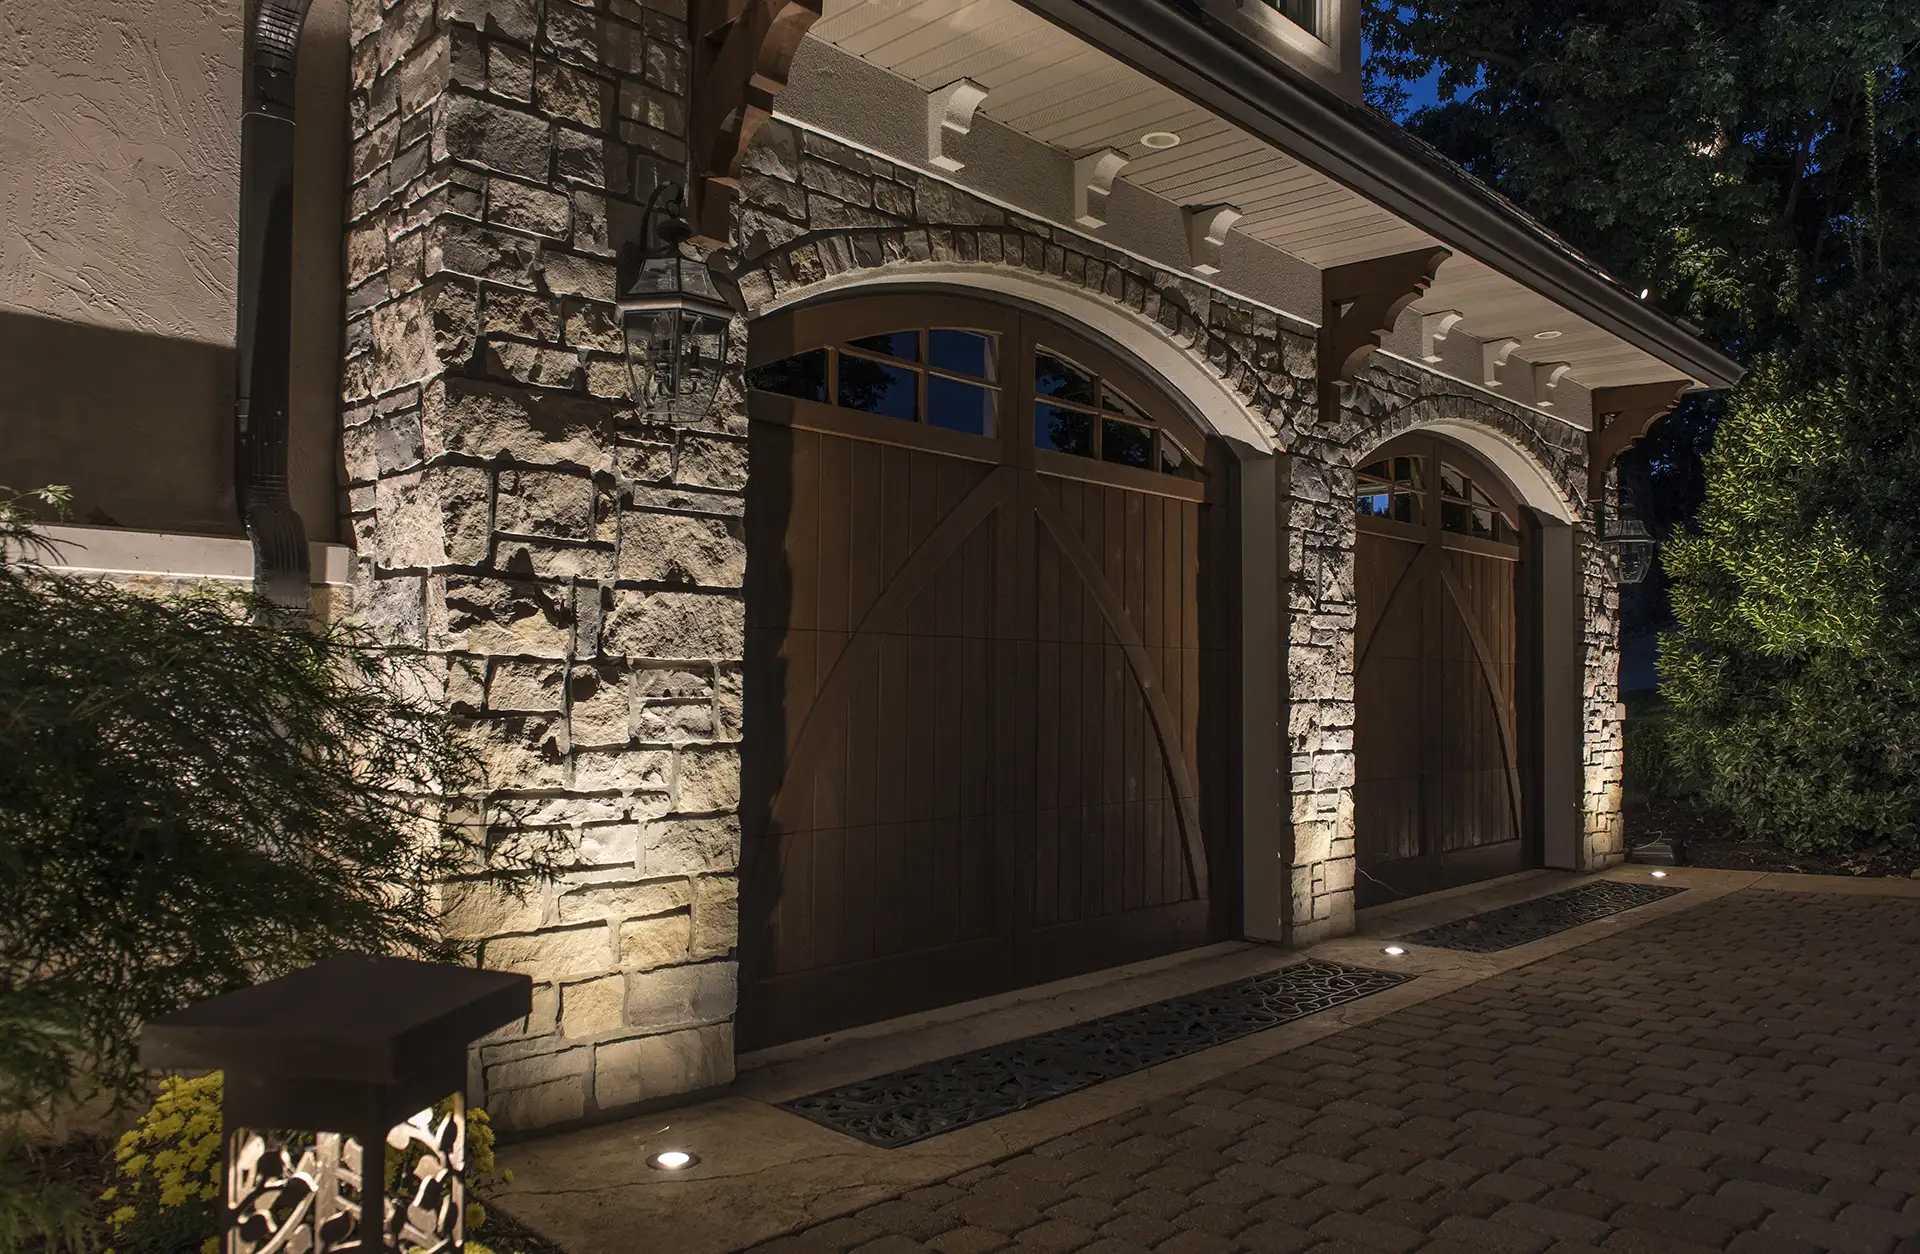 Ozarks lake house image 10 garage doors and inset lights Lighthouse Outdoor Lighting and Audio Central MO Missouri